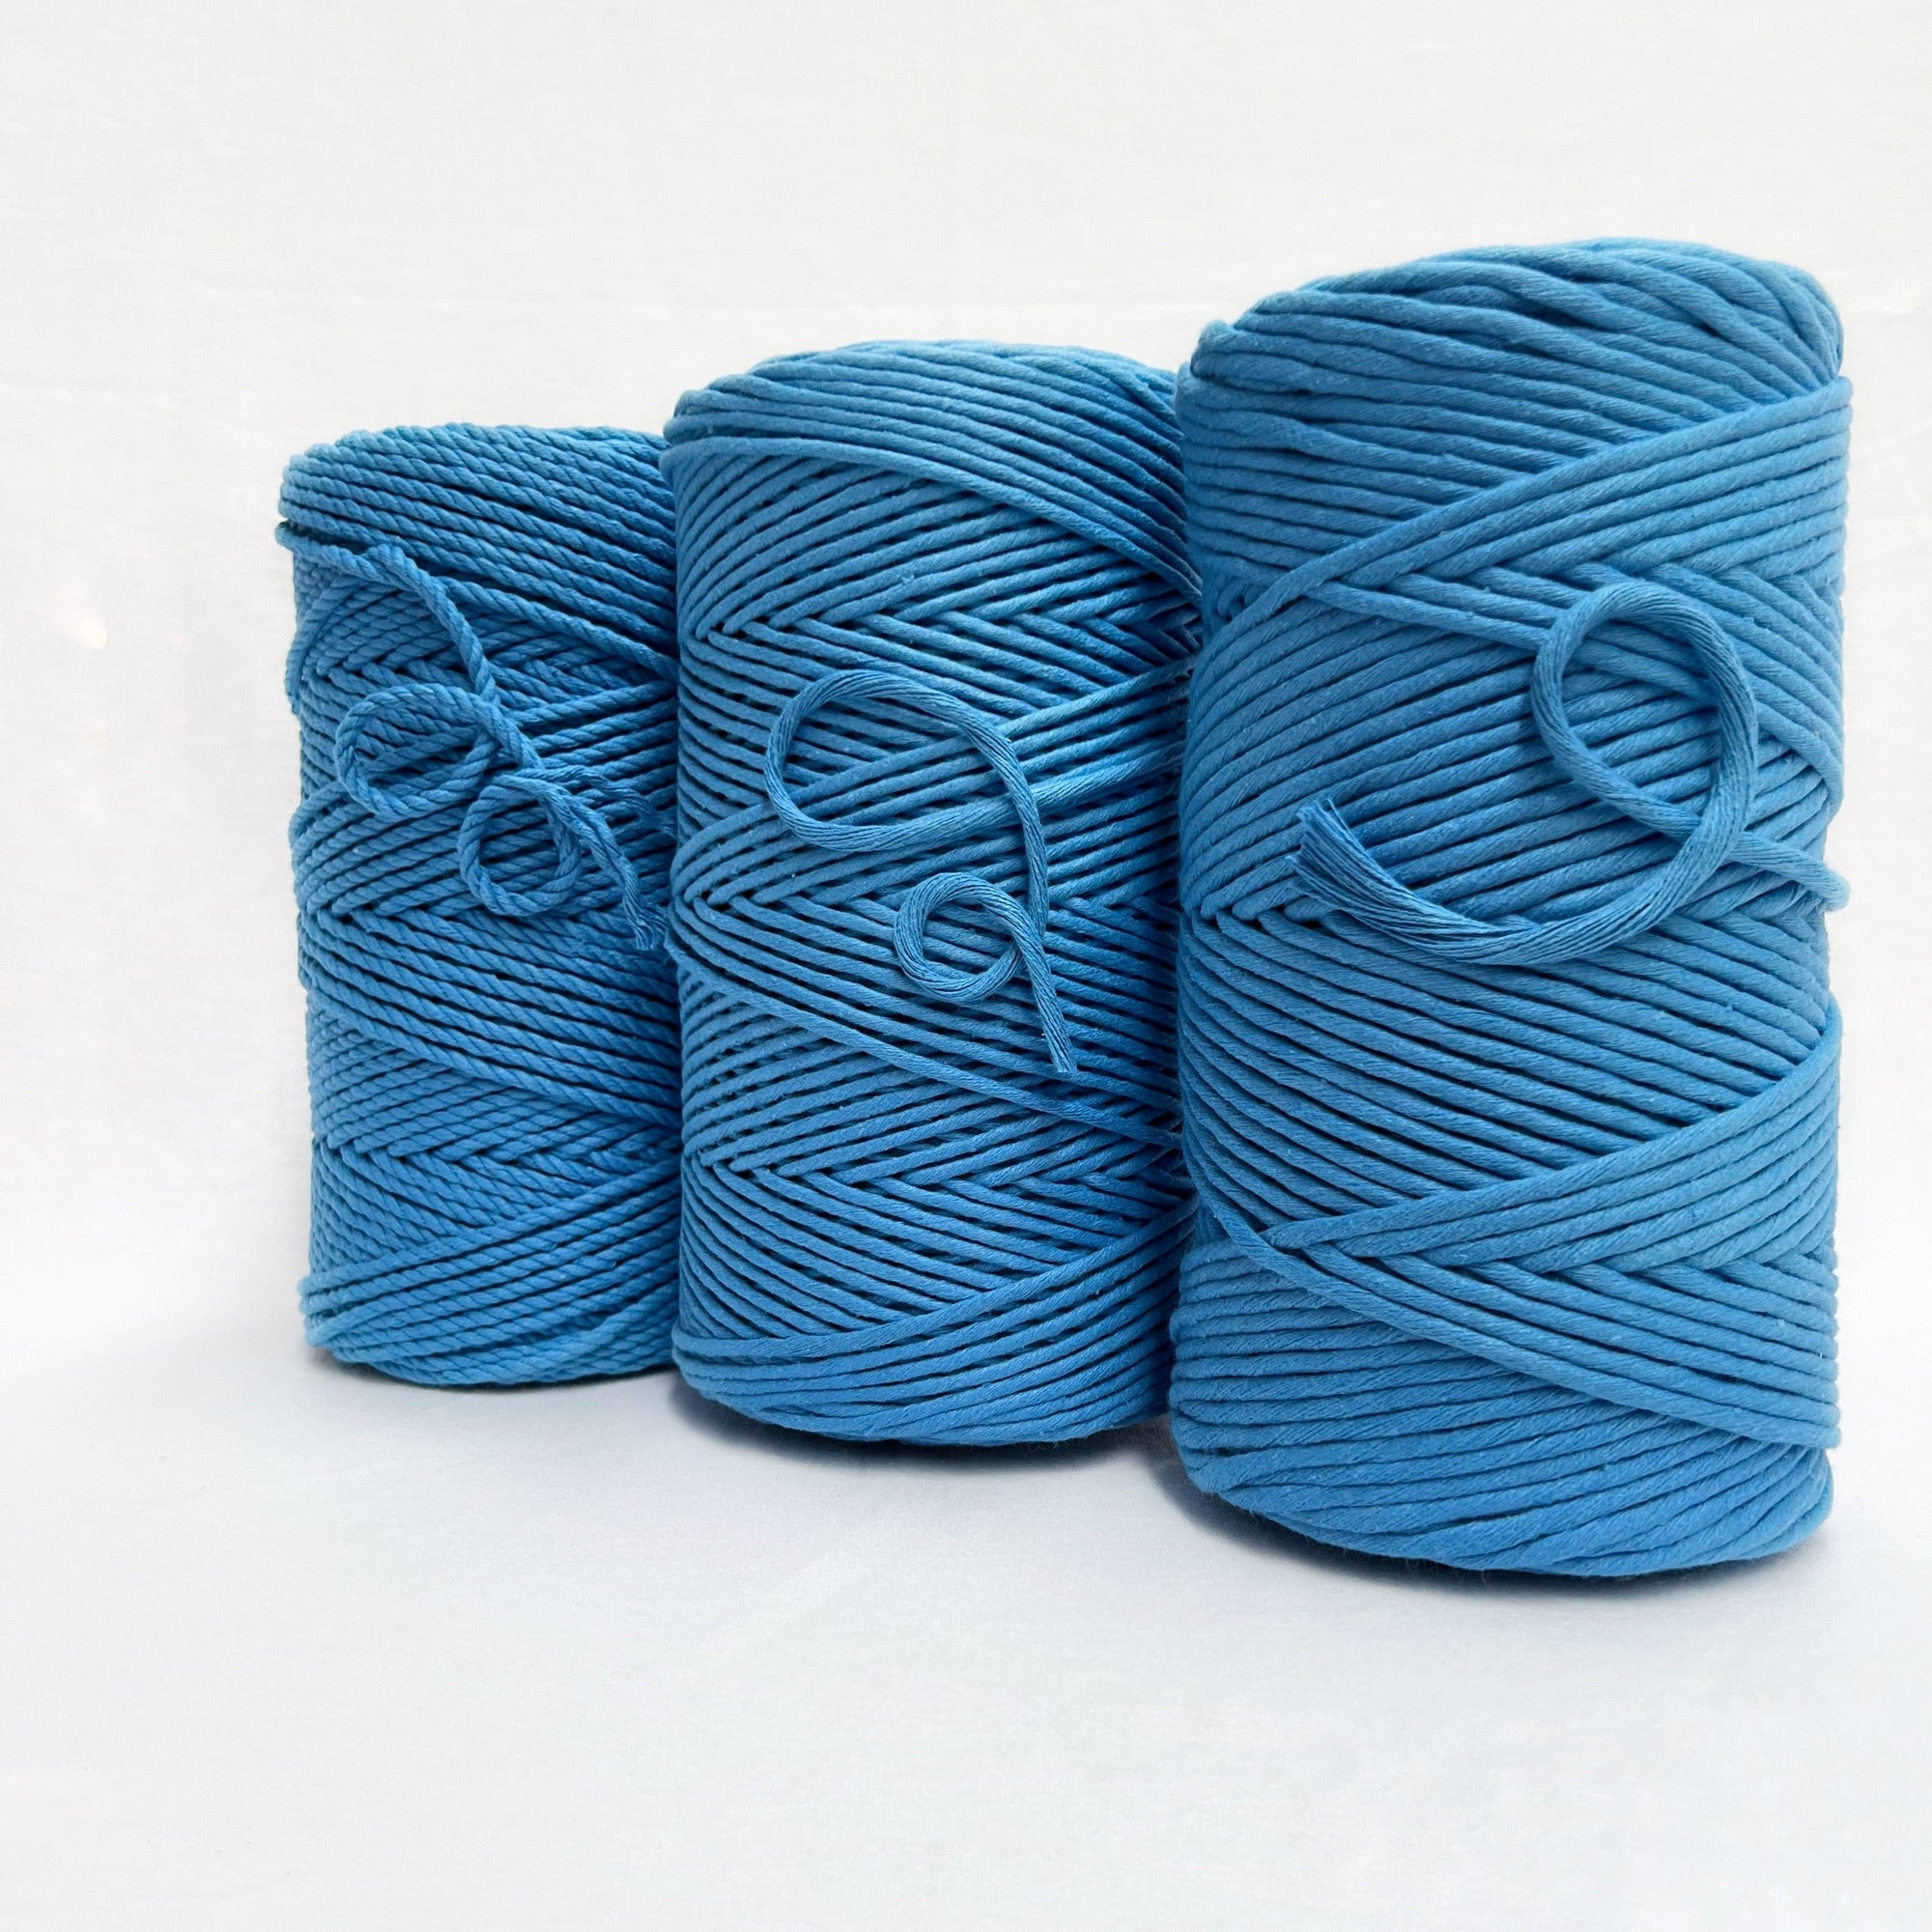 mary maker studio 1kg 4mm recycled cotton macrame rope in bright bondi blue colour suitable for macrame workshops beginners and advanced artists